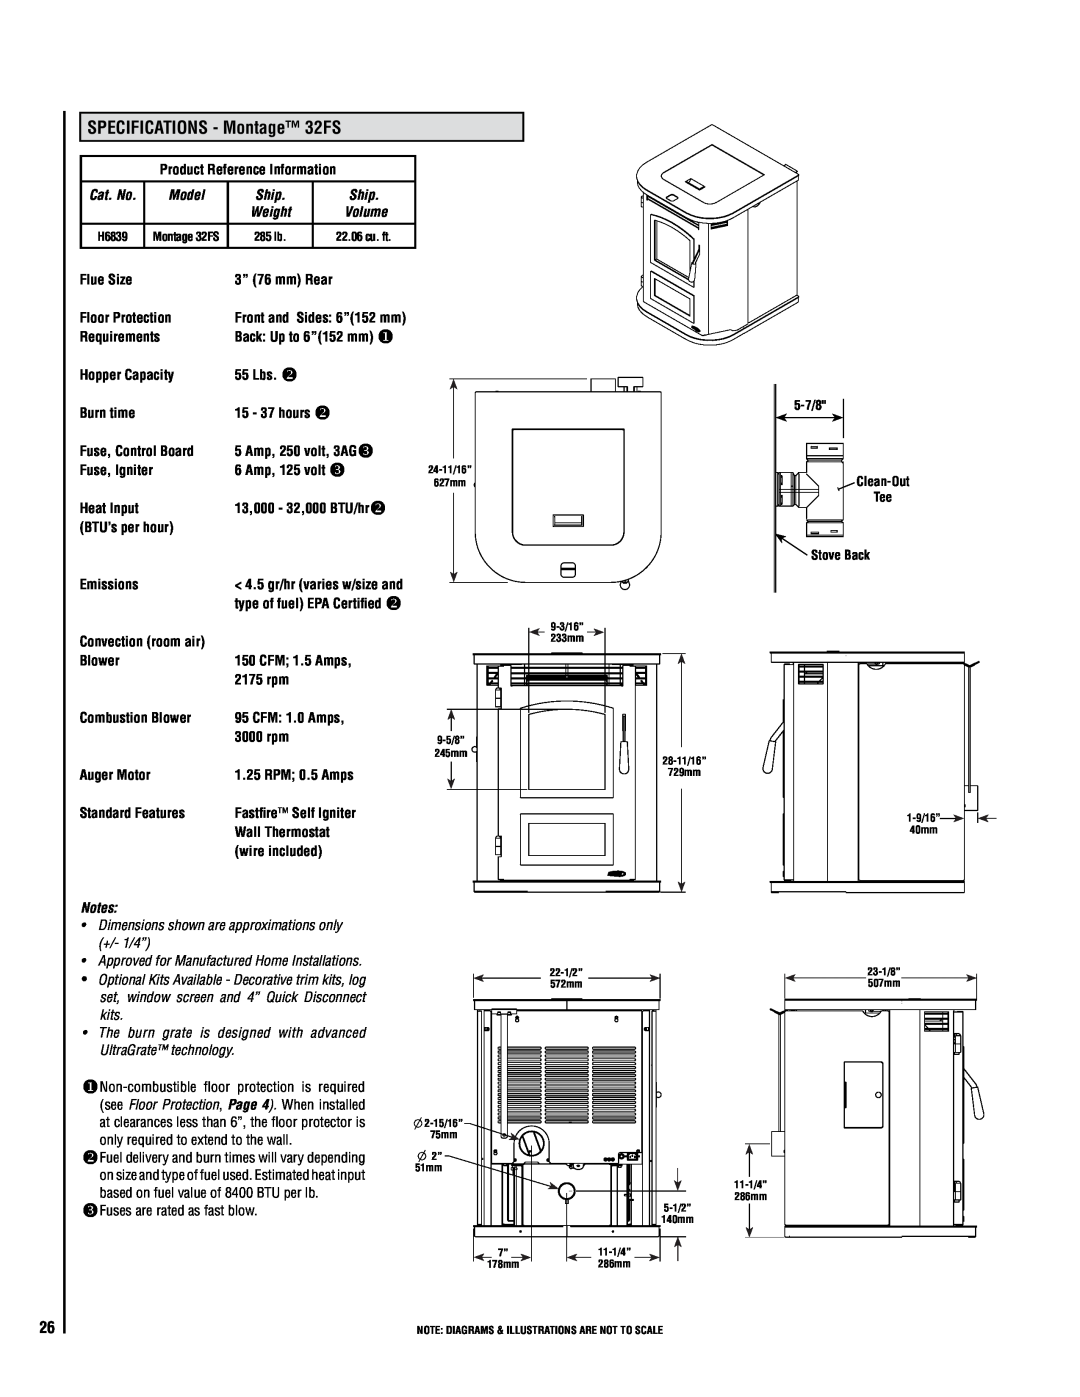 Lennox Hearth operation manual SPECIFICATIONS - Montage 32FS, Dimensions shown are approximations only, 25+/- 1/4” 